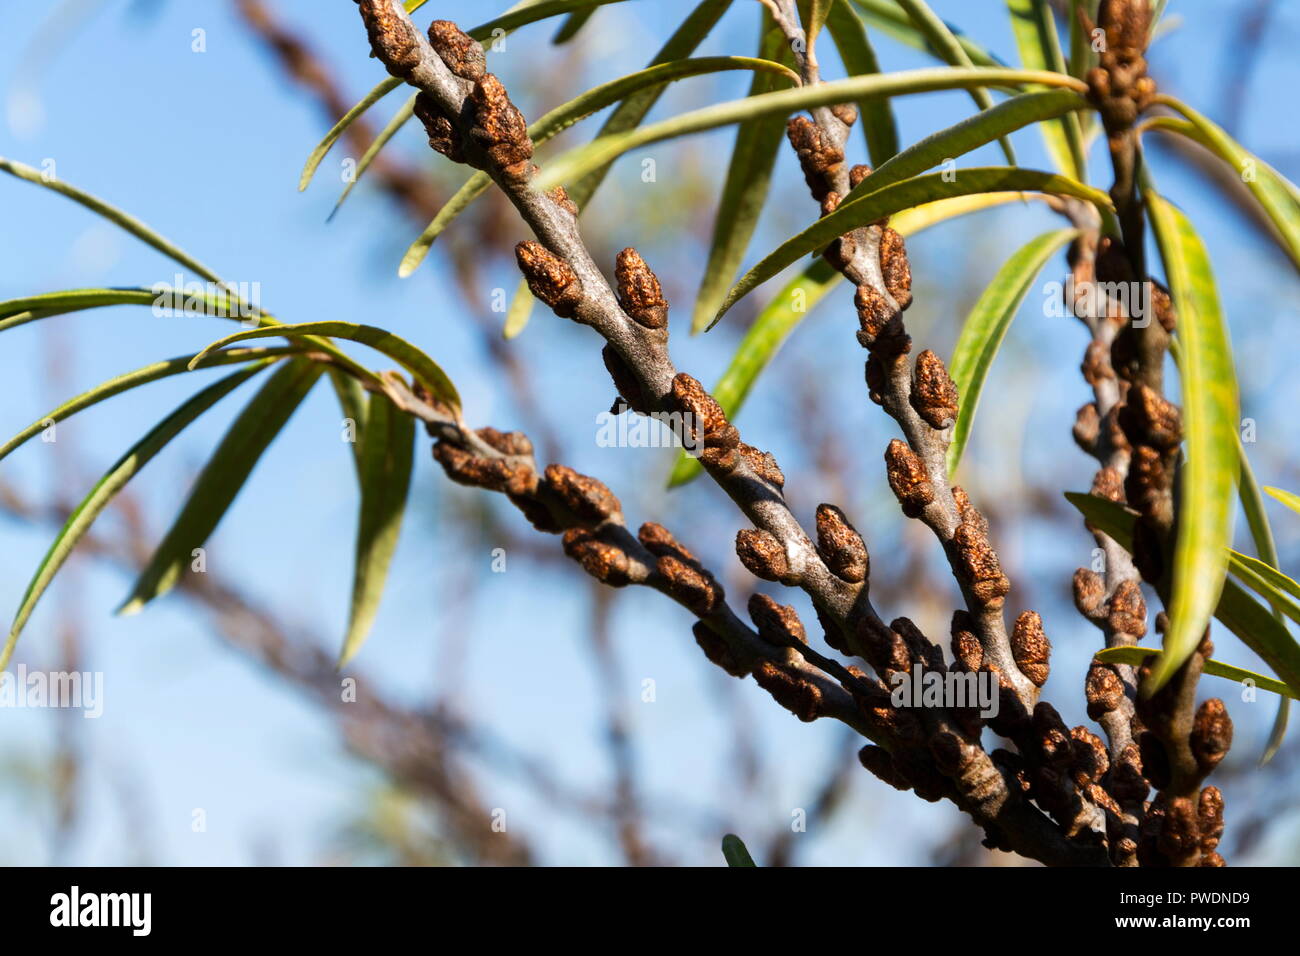 Hippophae rhamnoides male plants detail with female fruit berries in background, common sea buckthorn shrub Stock Photo